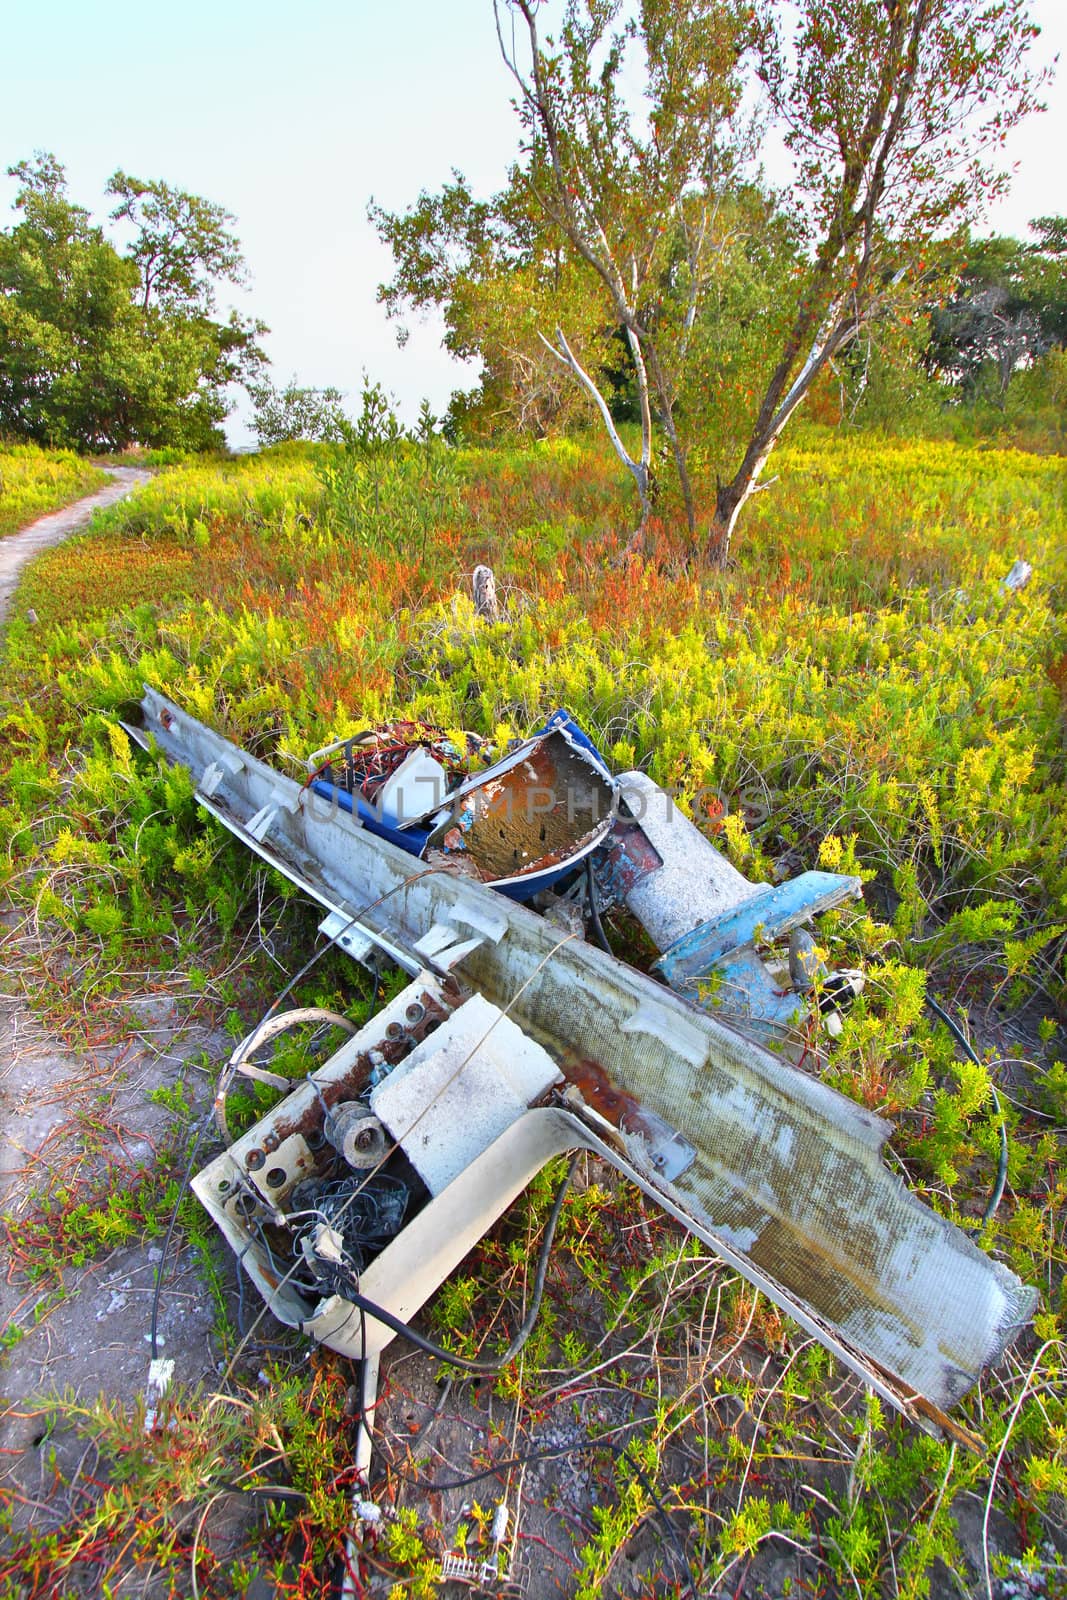 Wrecked boat in the coastal prairie of Everglades National Park.